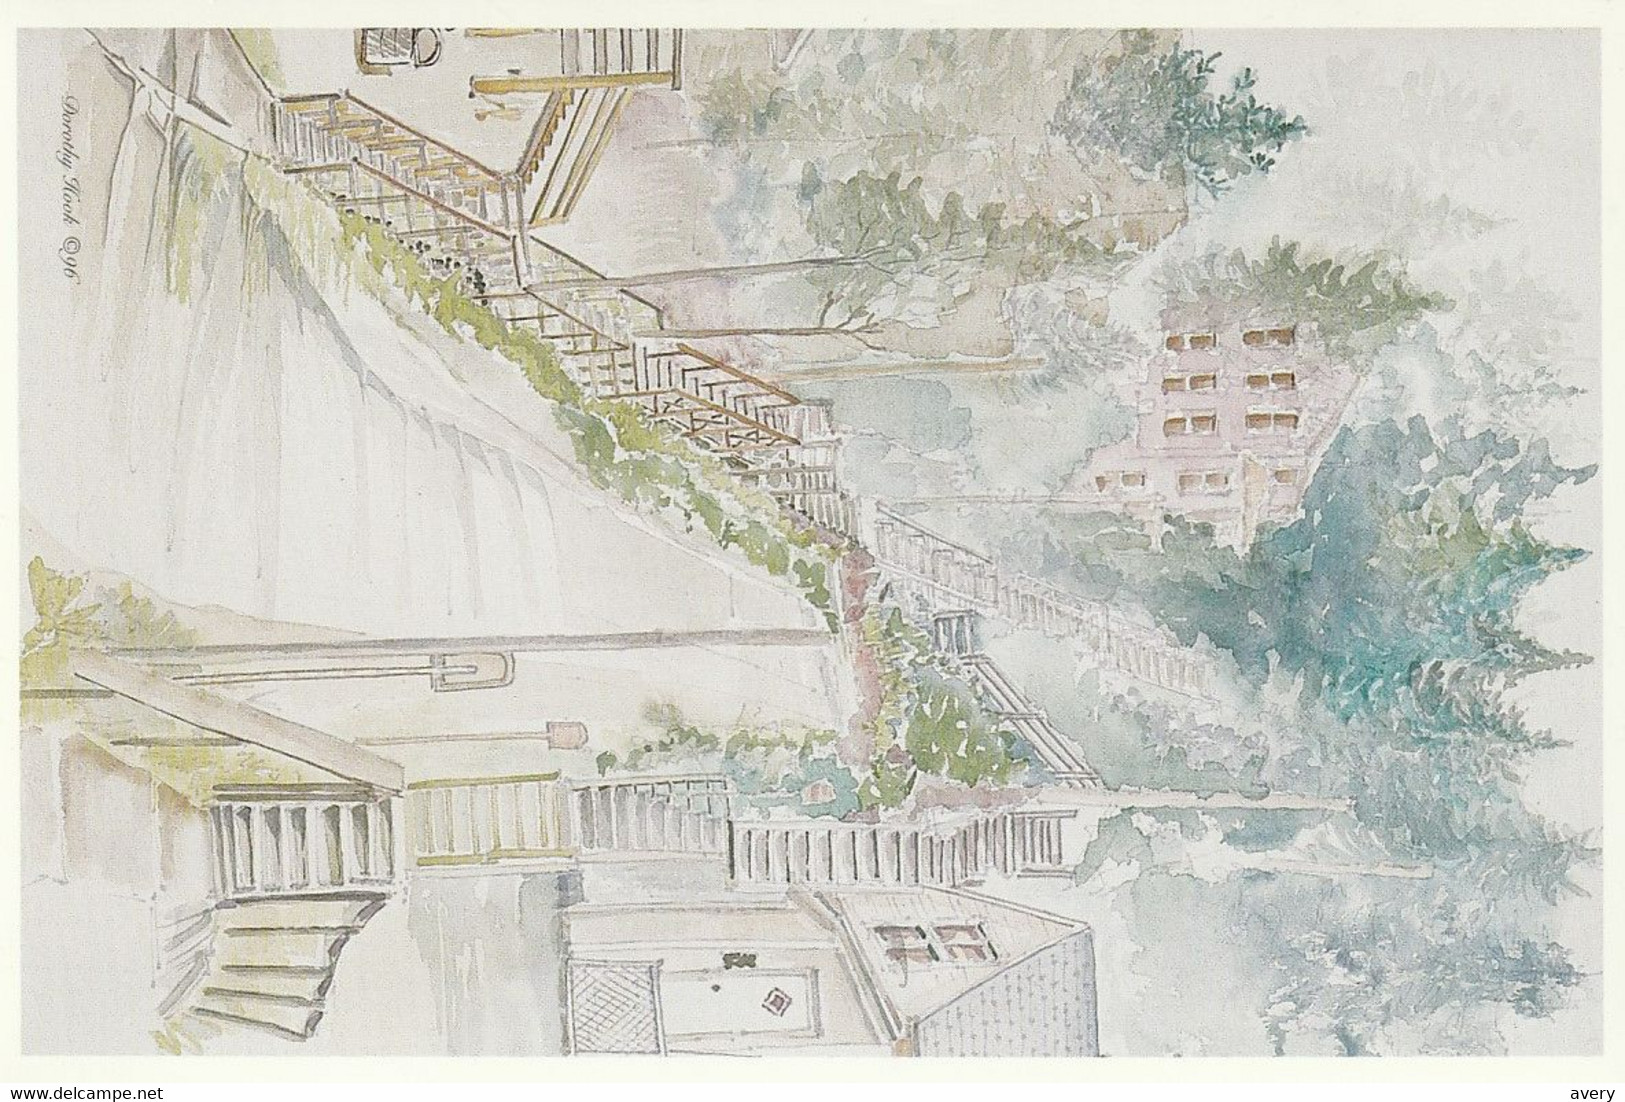 Juneau Steps Steps Of All Sizes And Colors Weave Between Hillside Houses  From Original Watercolor By Dorothy Hook - Juneau